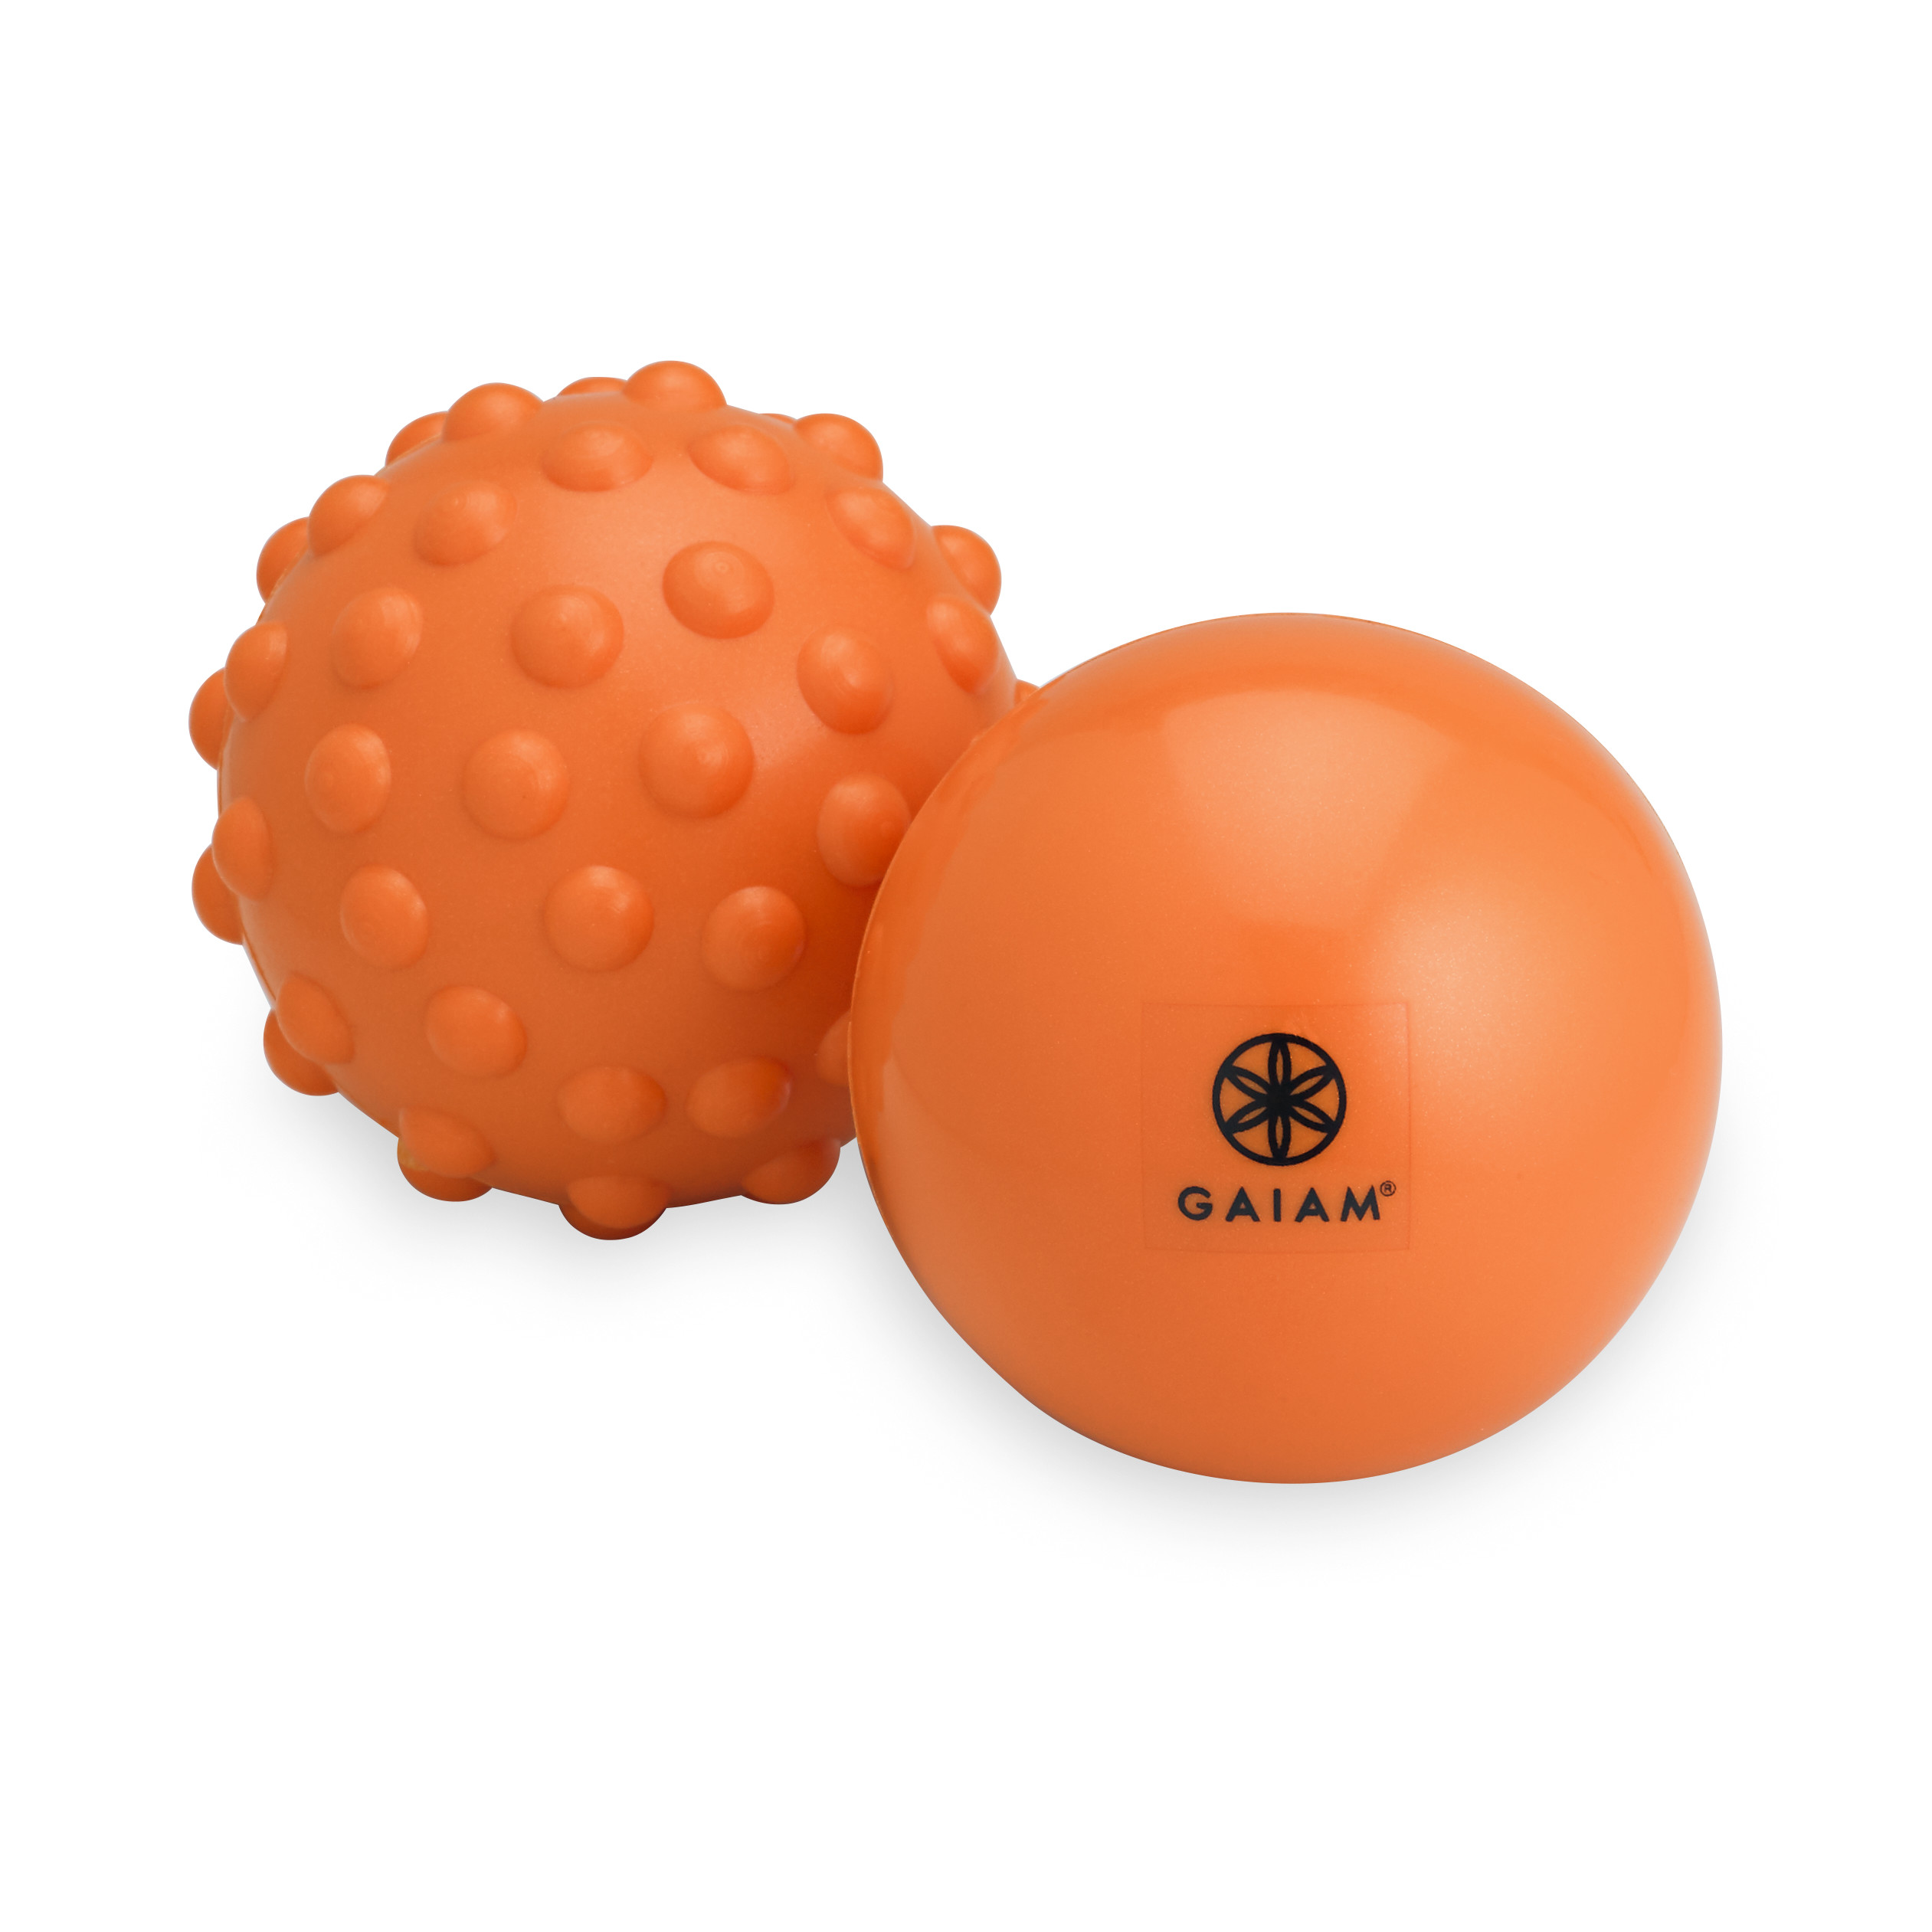 GAIAM Hot and cold Therapy